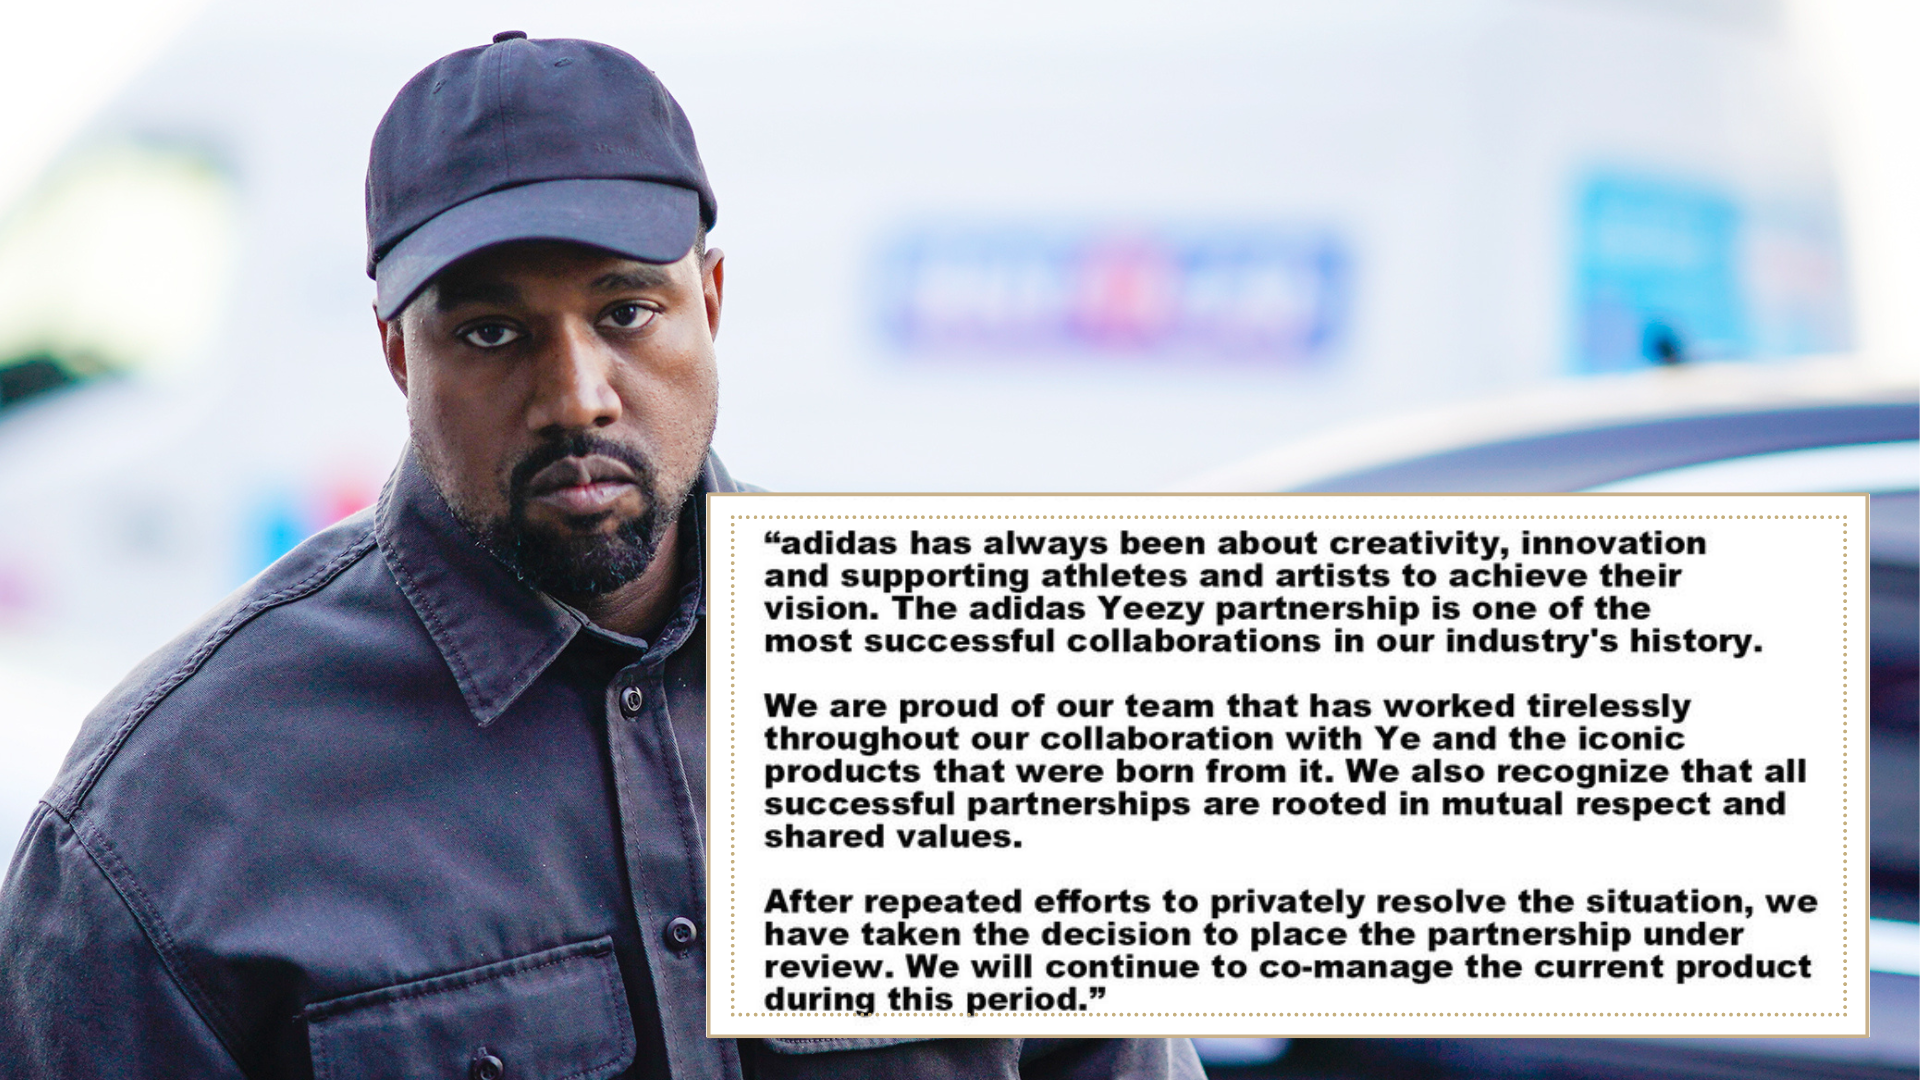 Adidas has issued an official statement regarding Kanye West bringing their partnership to an end